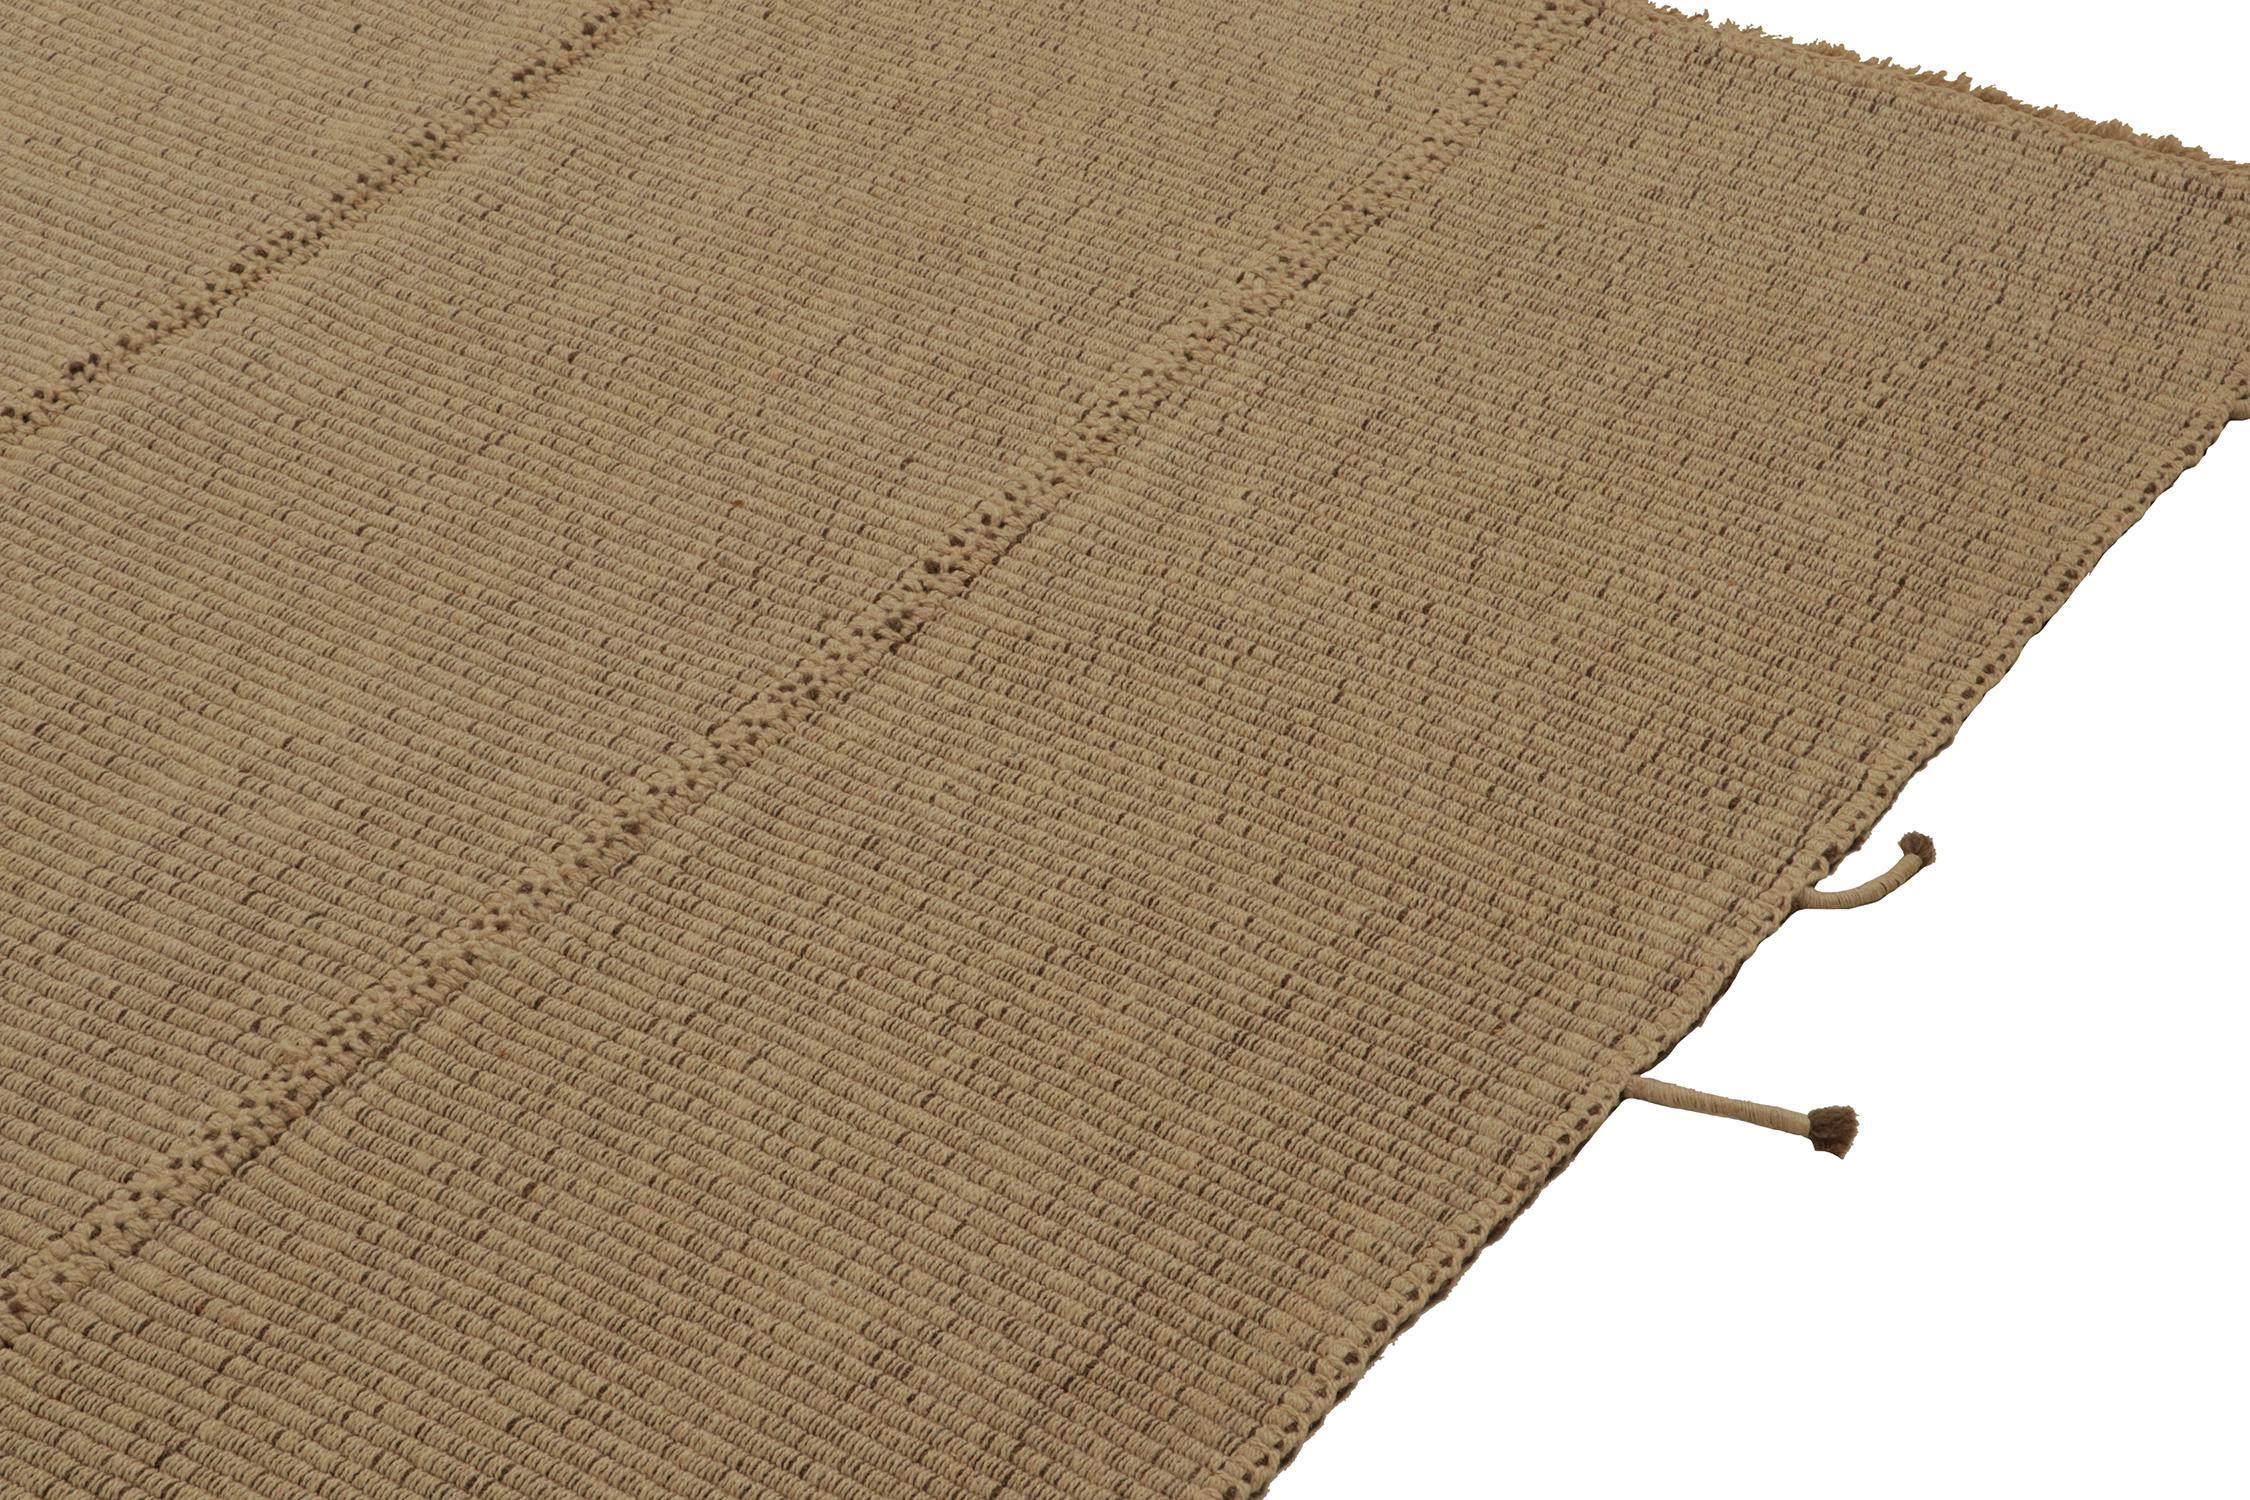 Hand-Knotted Rug & Kilim’s Contemporary Kilim in Sandy, Solid Beige-Brown Panel Woven Style For Sale